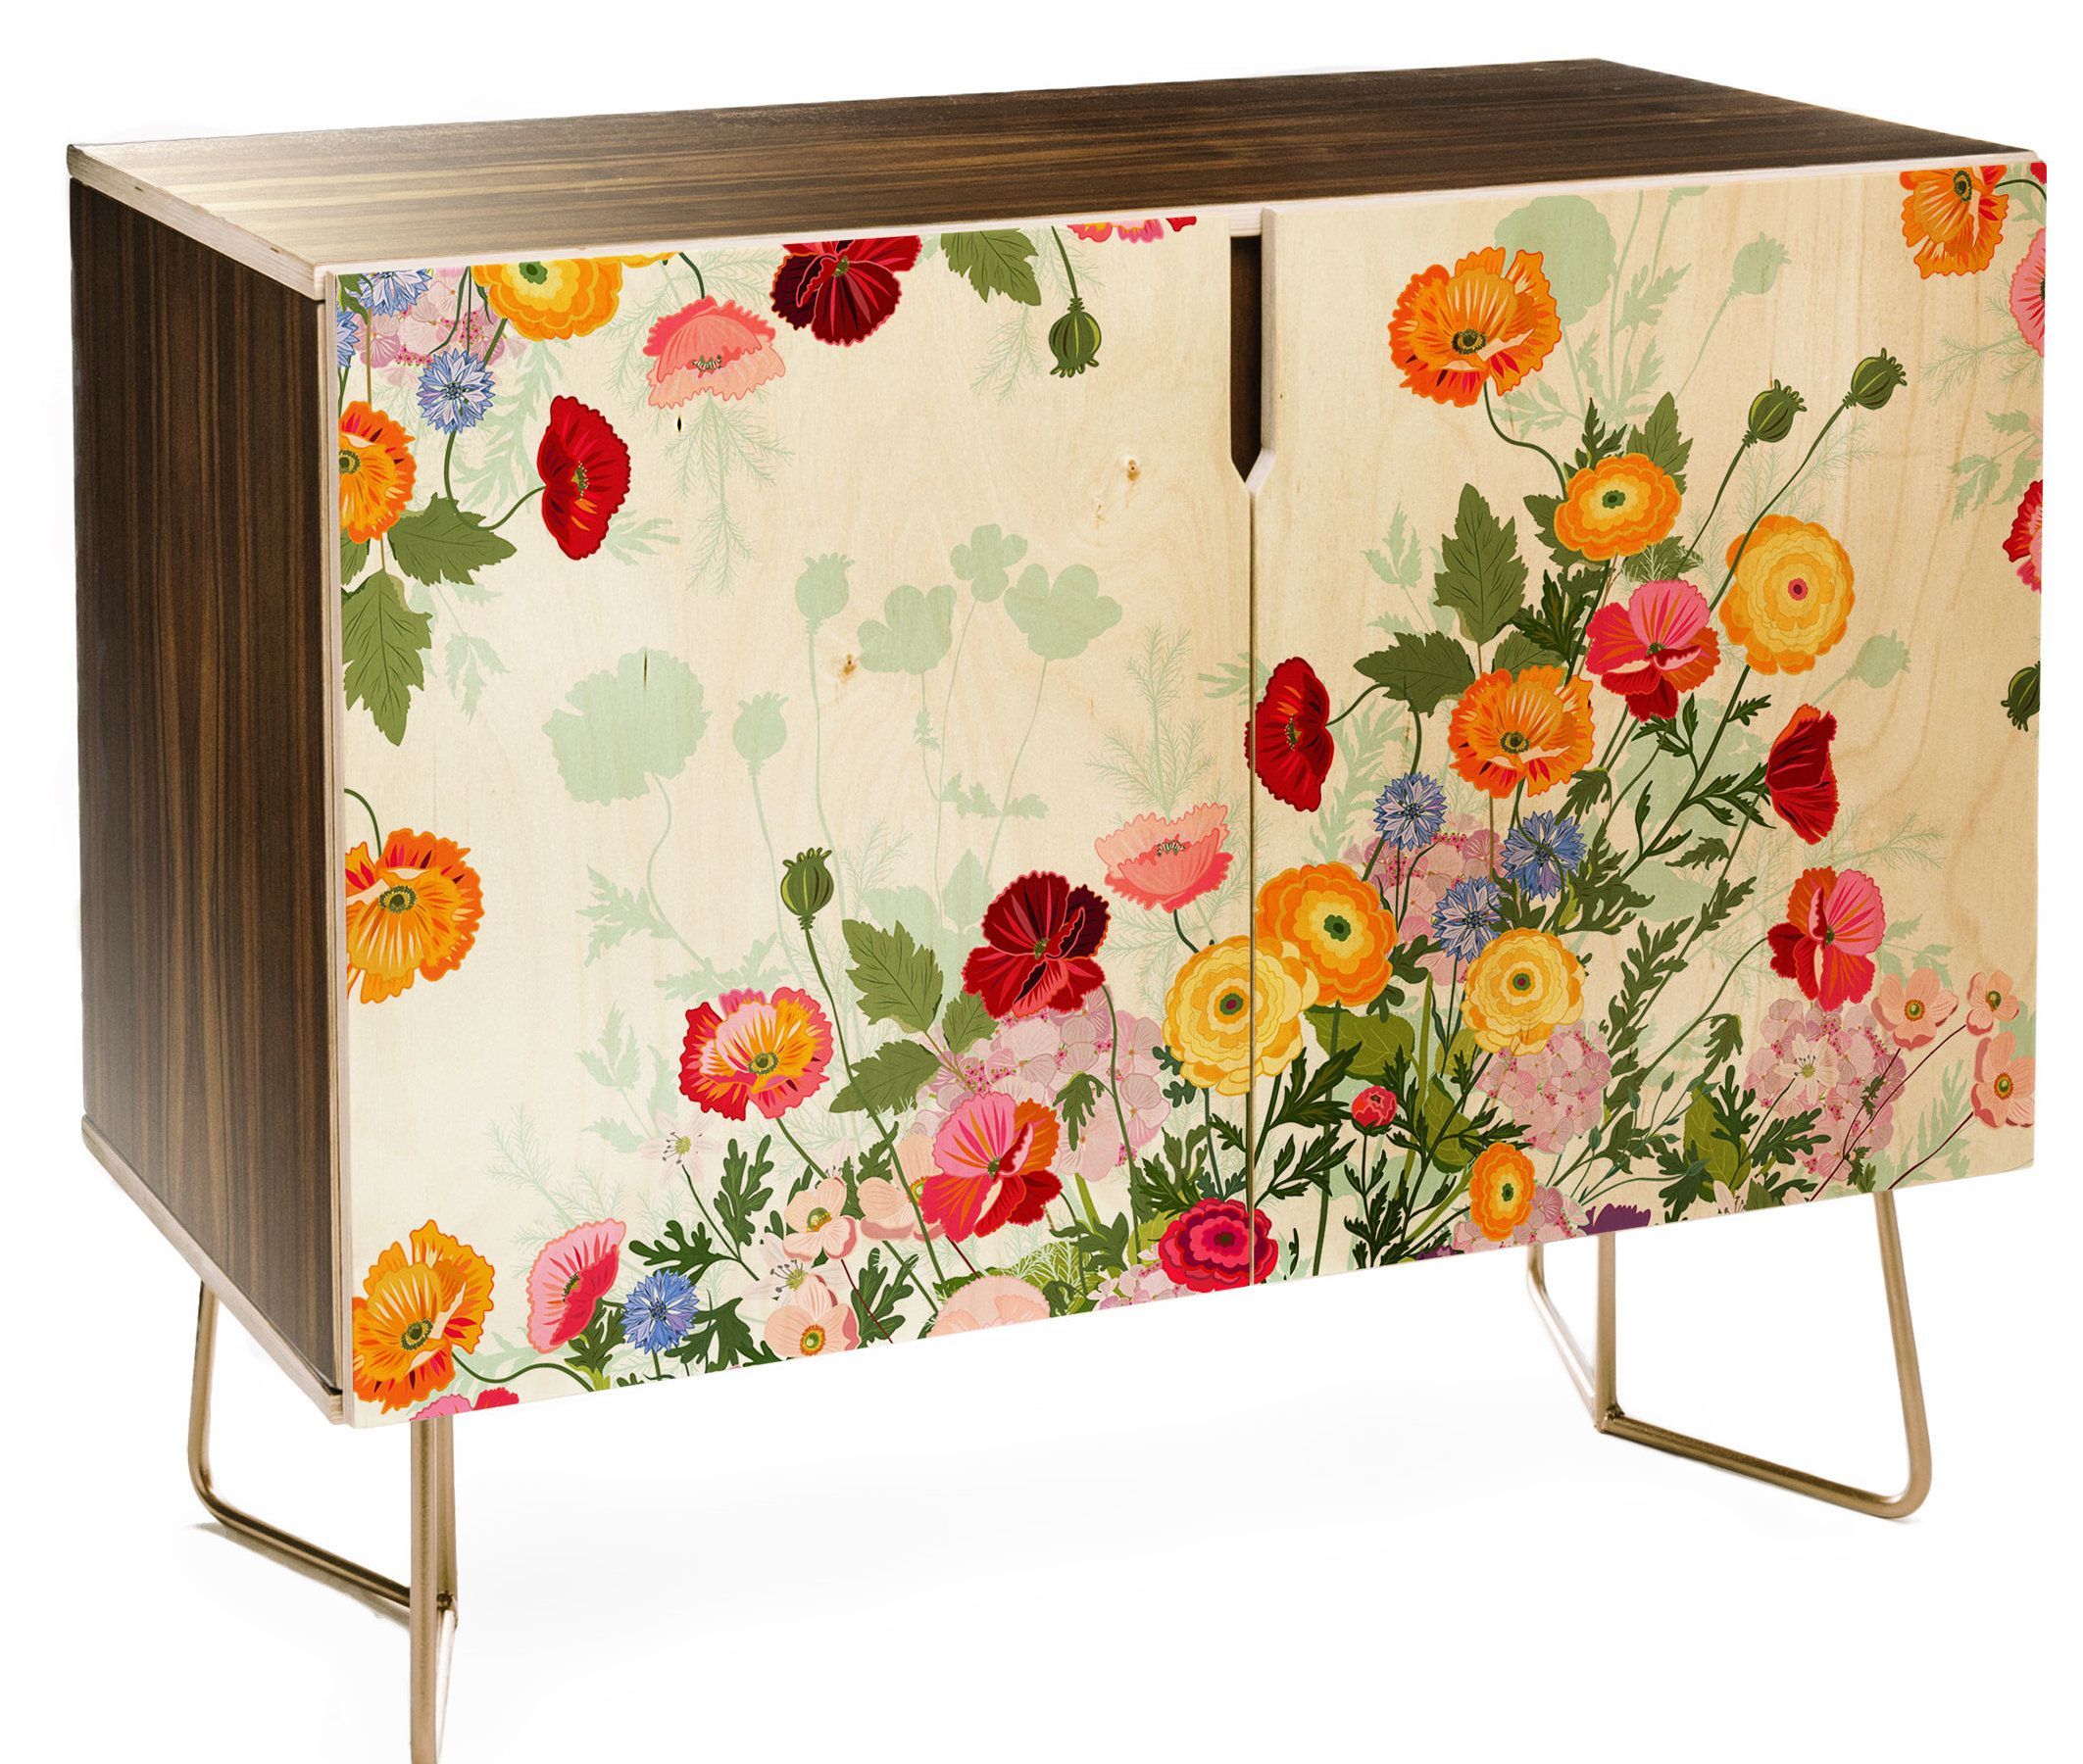 East Urban Home Iveta Abolina Emmaline Credenza In 2019 Intended For Fleurette Night Credenzas (View 9 of 30)